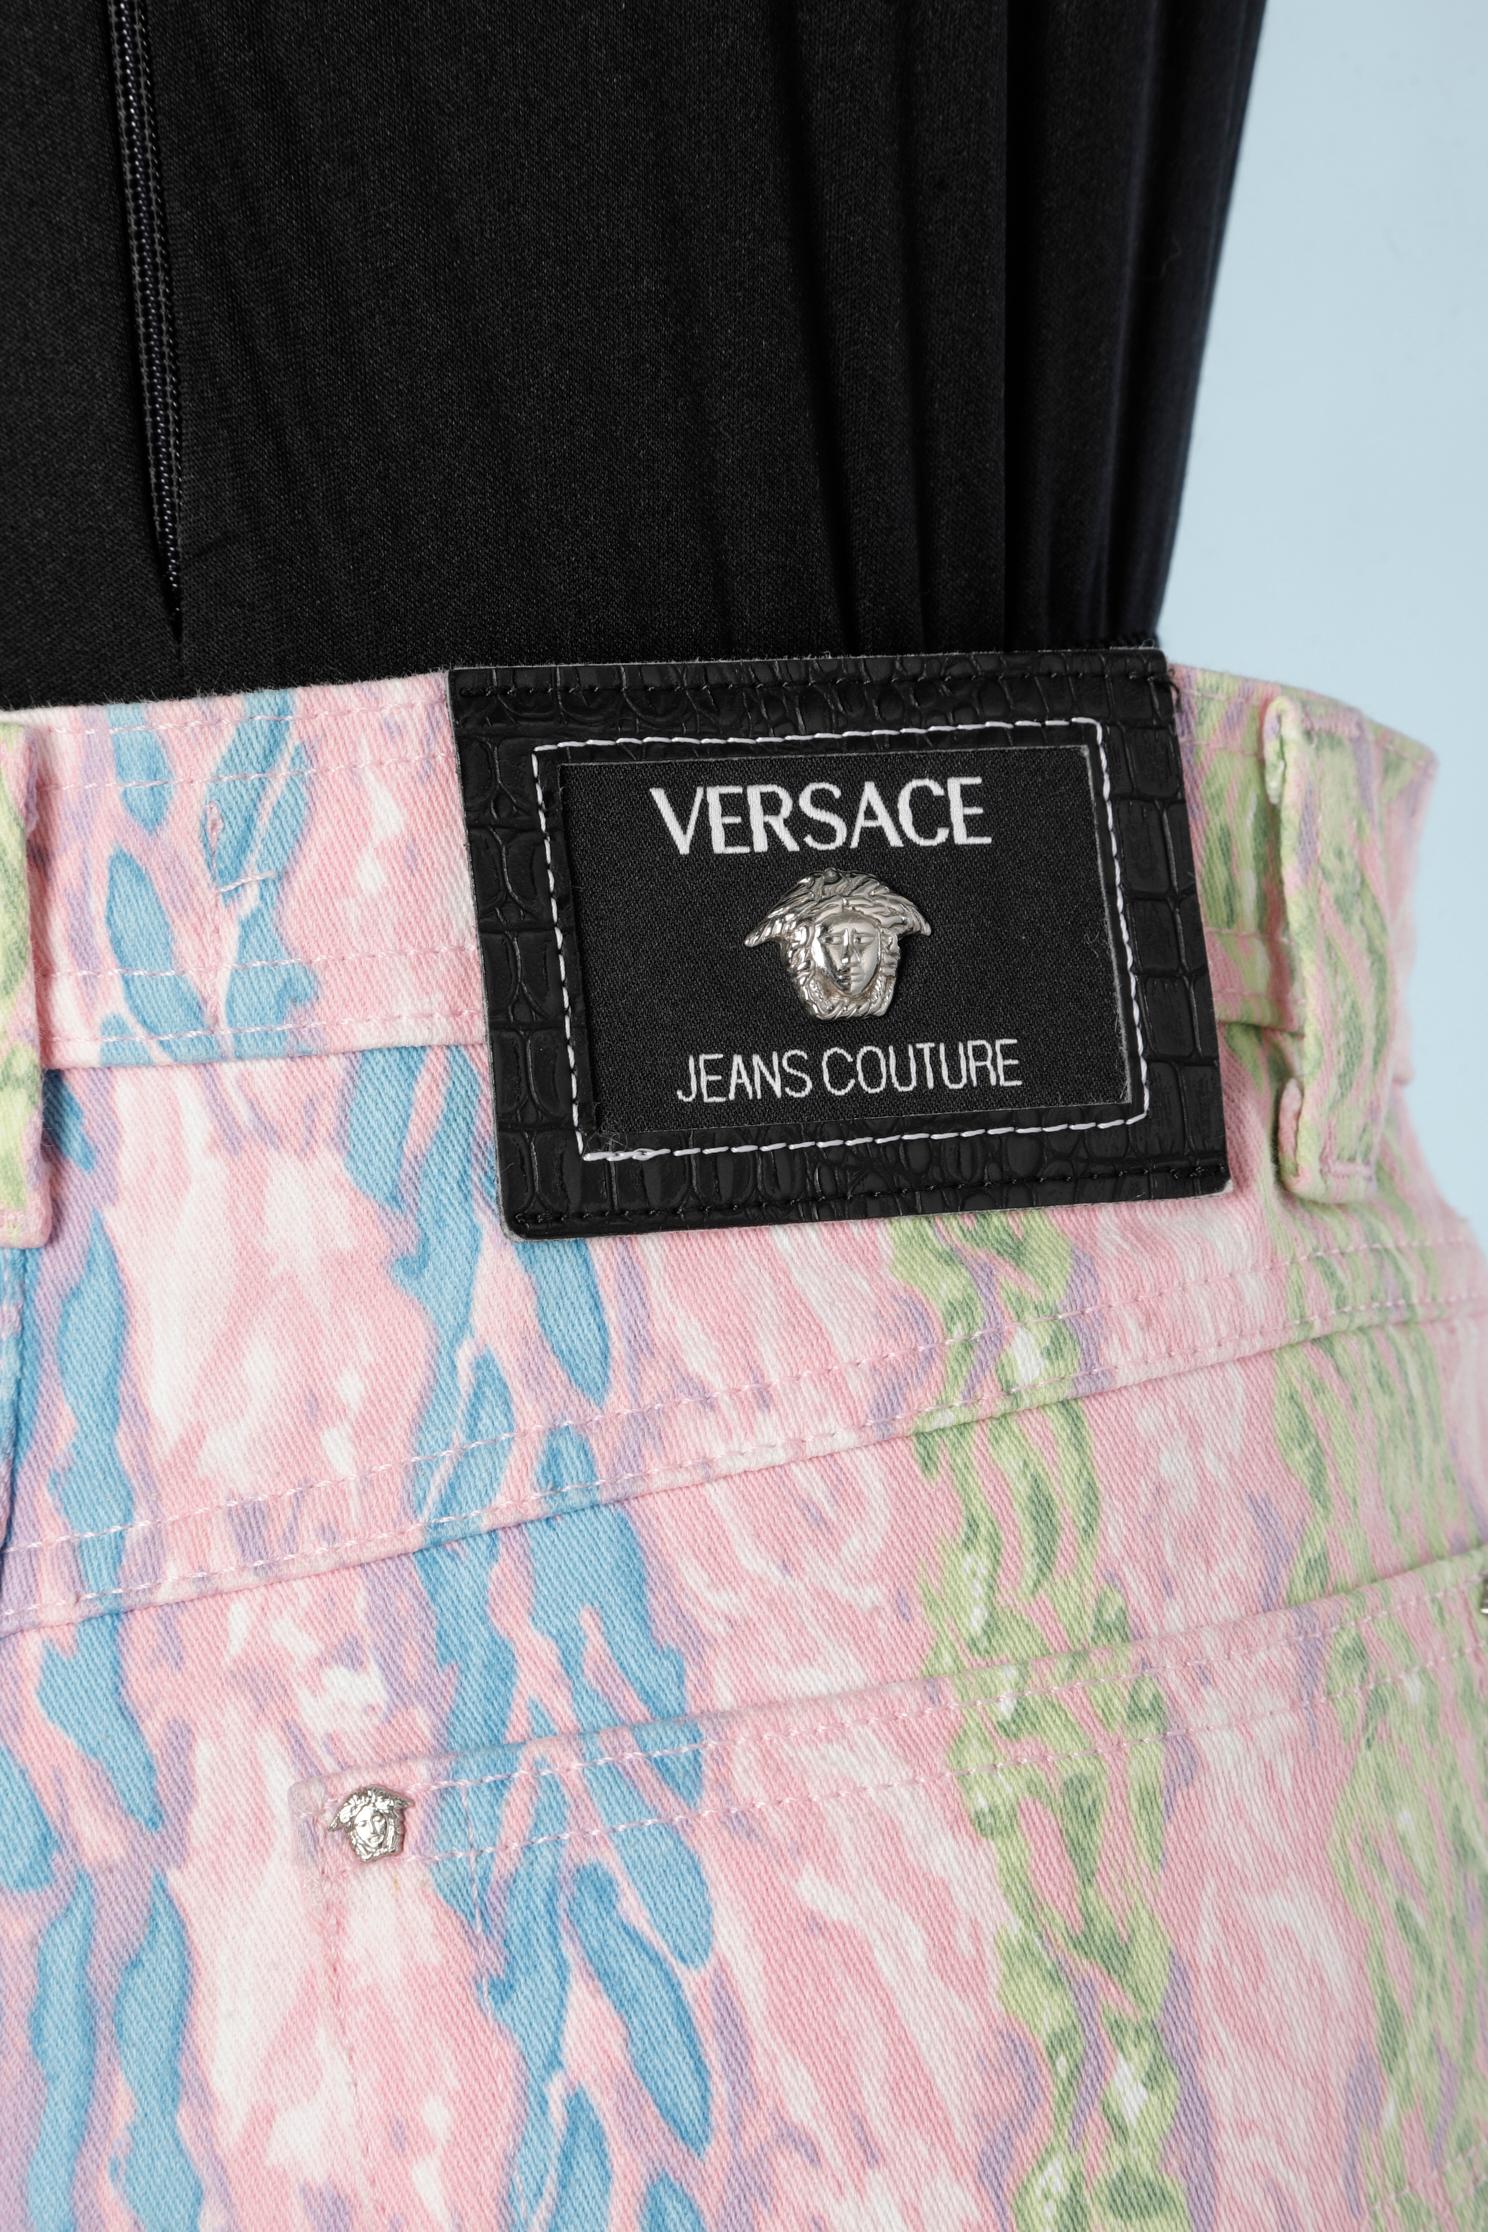 Pastel printed denim pants Versace Jean Couture  For Sale 1